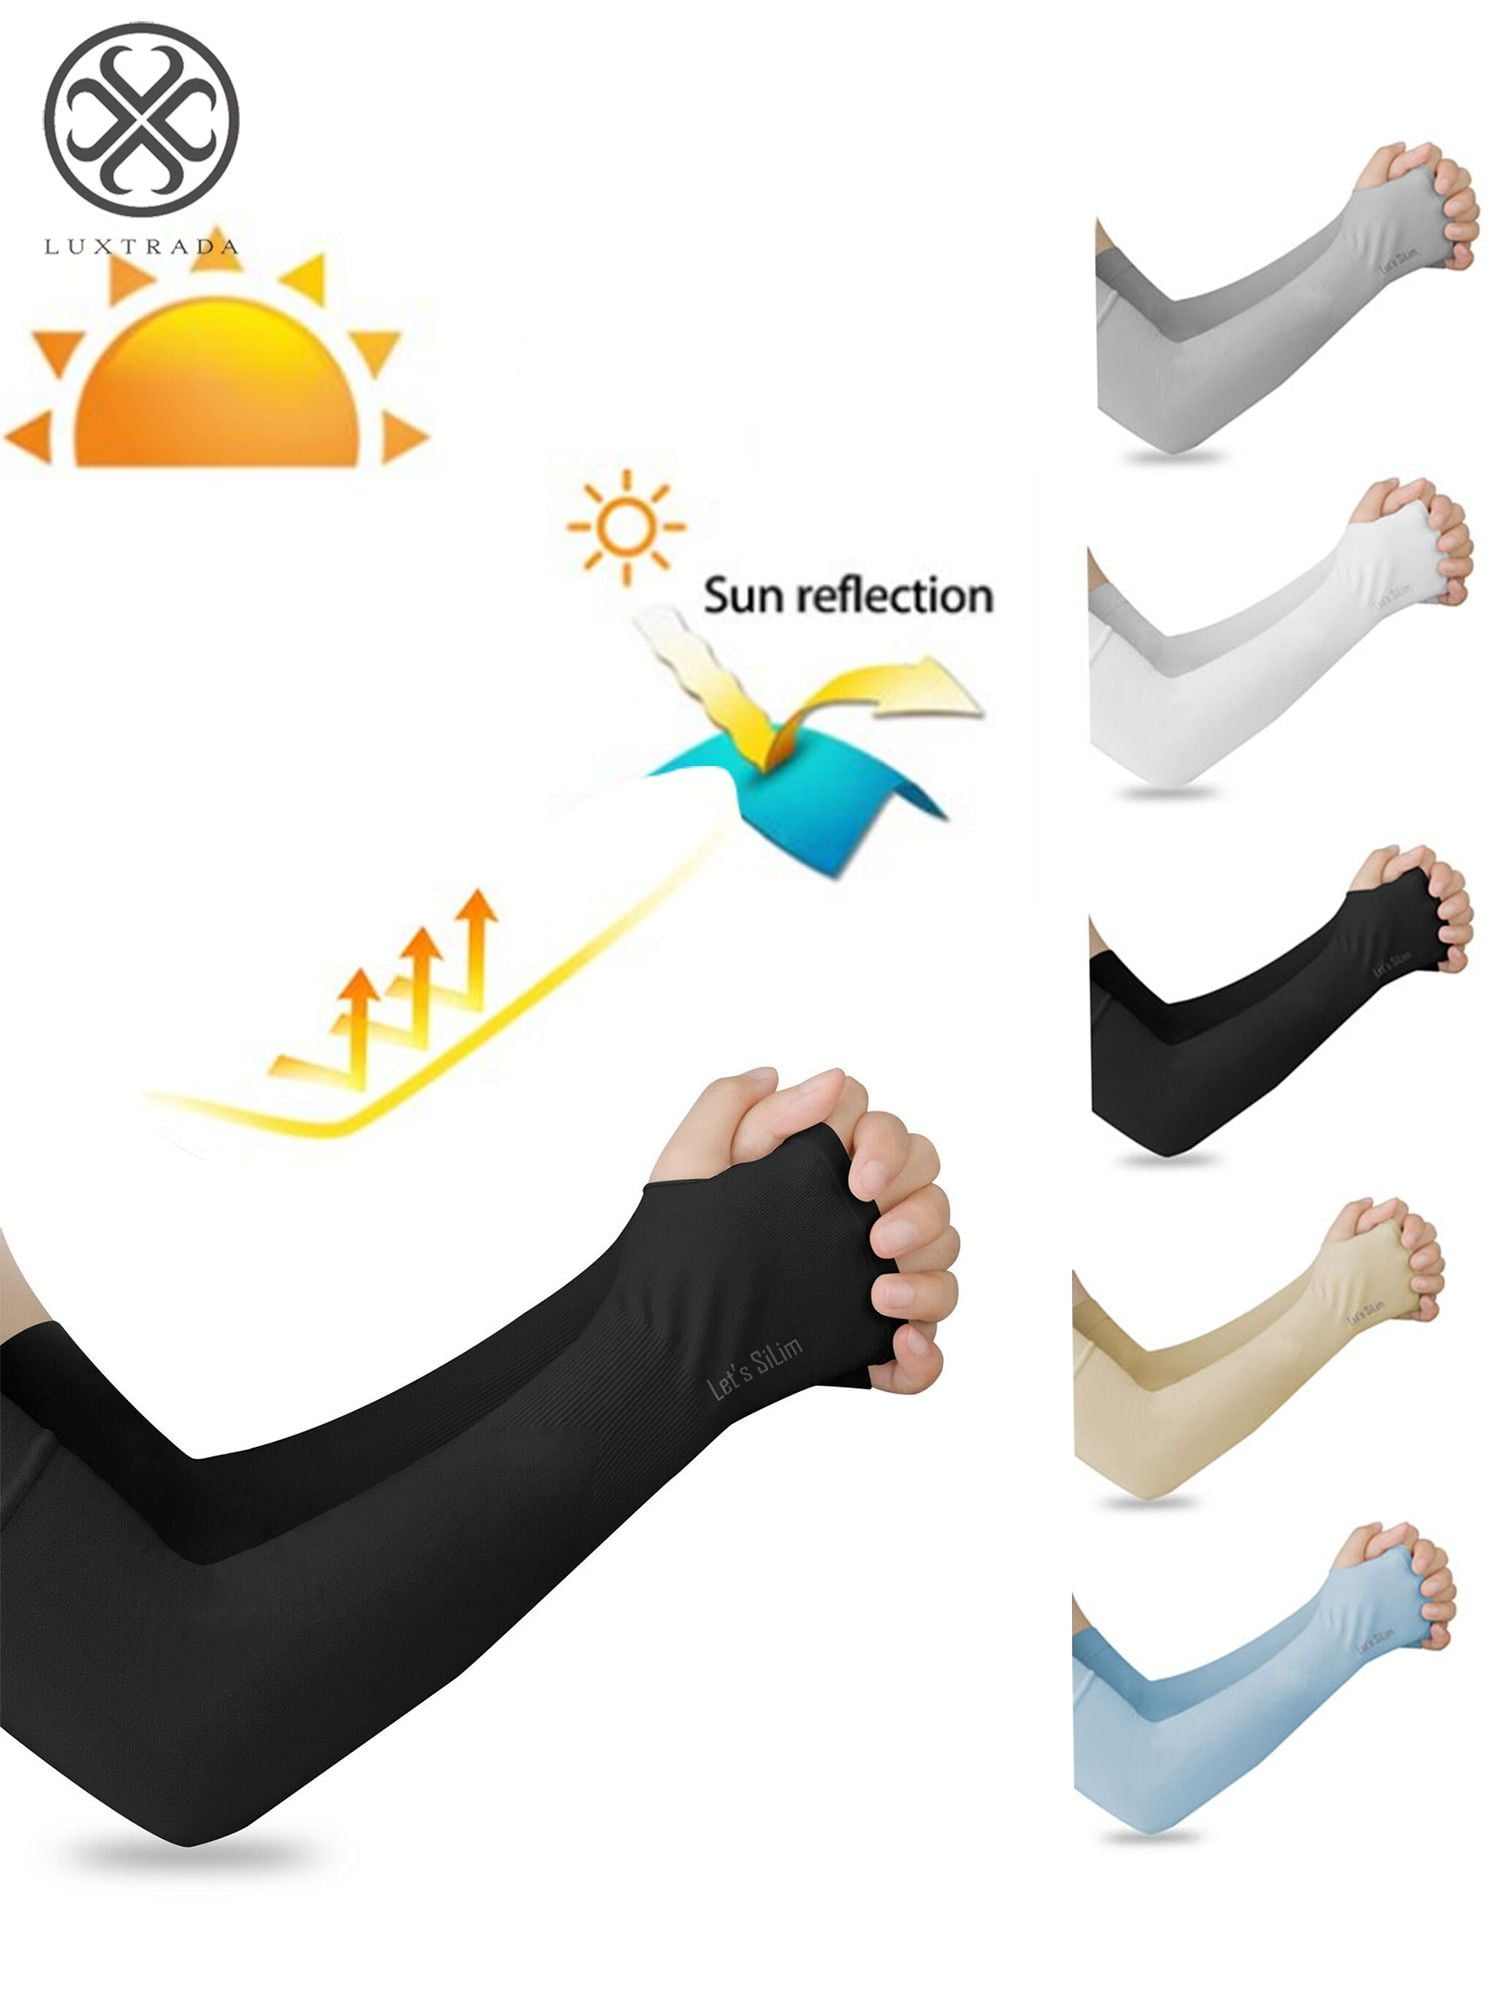 Details about   Pickadda Sun UV Protection Arm Sleeve Cover Outdoor Sports/ Breathe-aU5 